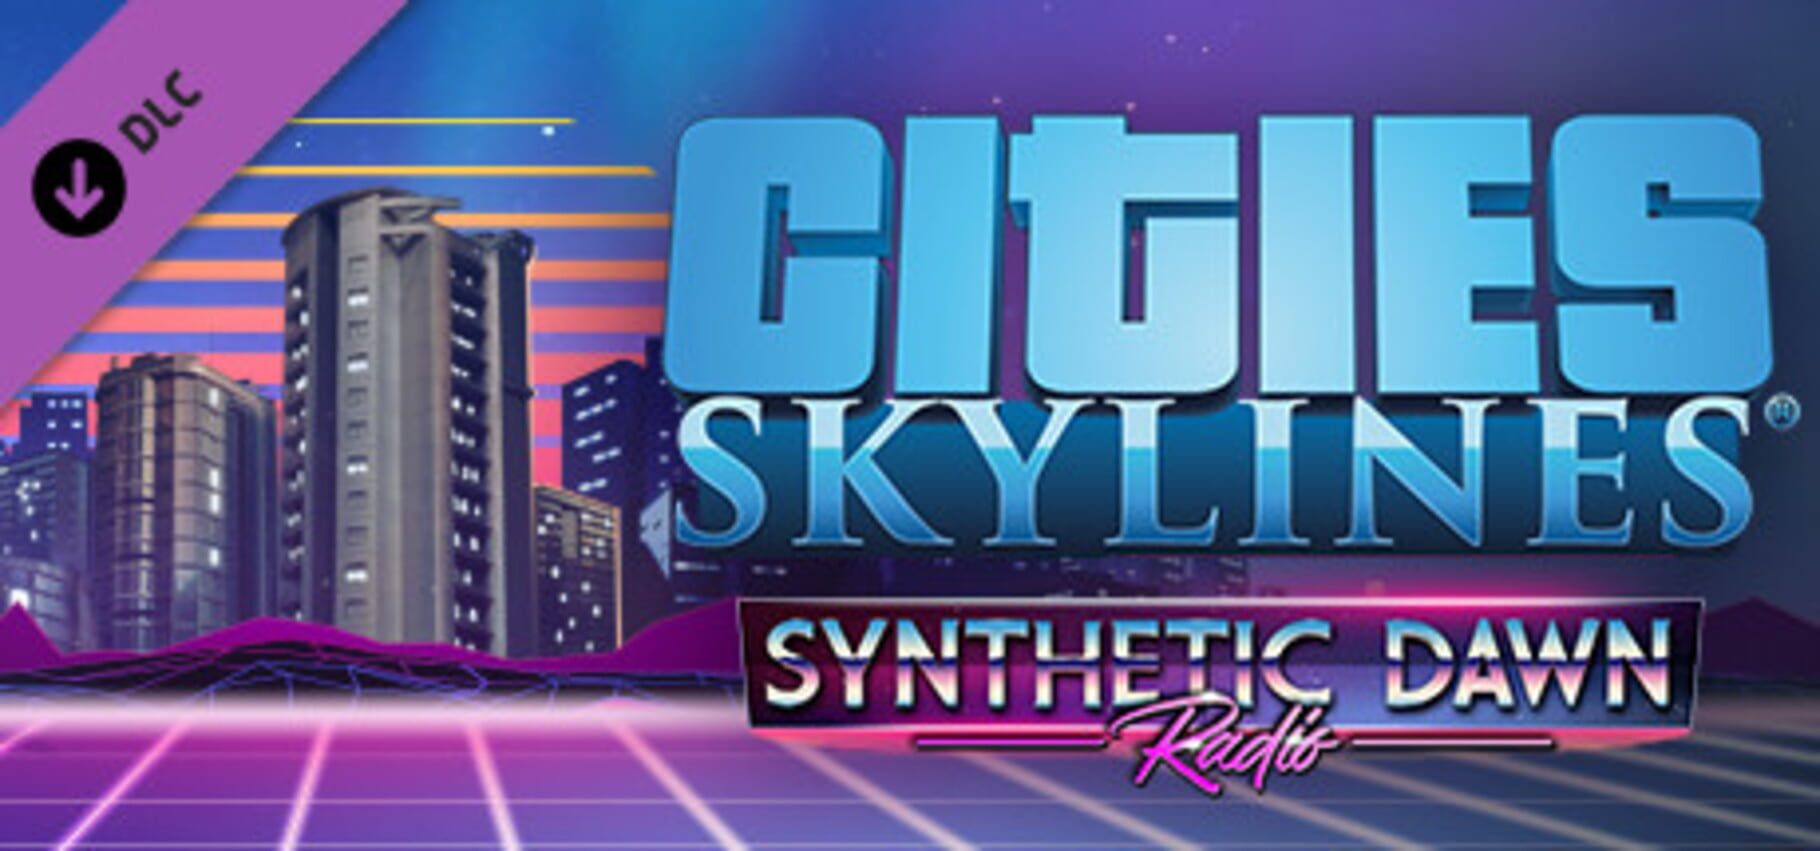 Cities: Skylines - Synthetic Dawn Radio featured image